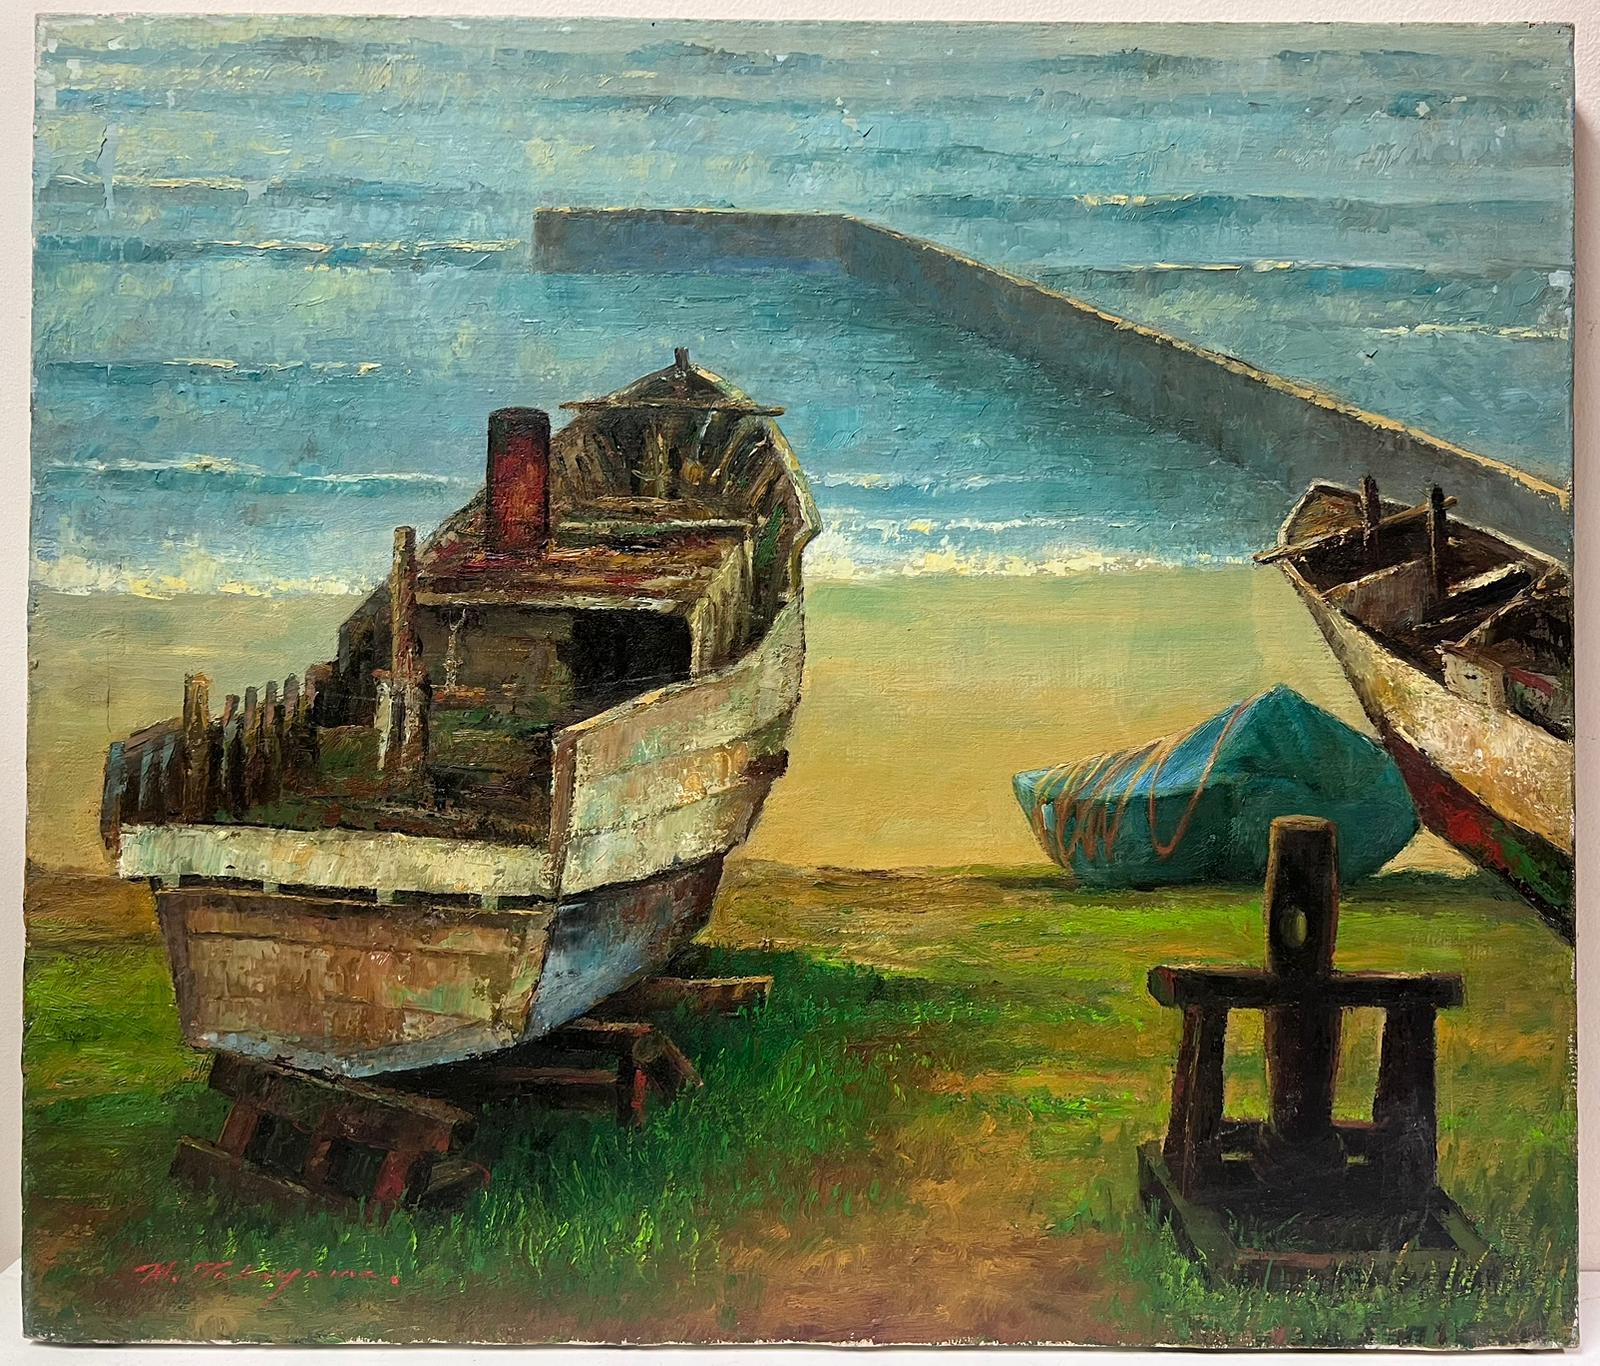 Moored Boats on the Beach
European School, 20th century
signed oil on canvas, unframed
canvas: 18 x 25 inches
provenance: private collection
condition: very good and sound condition